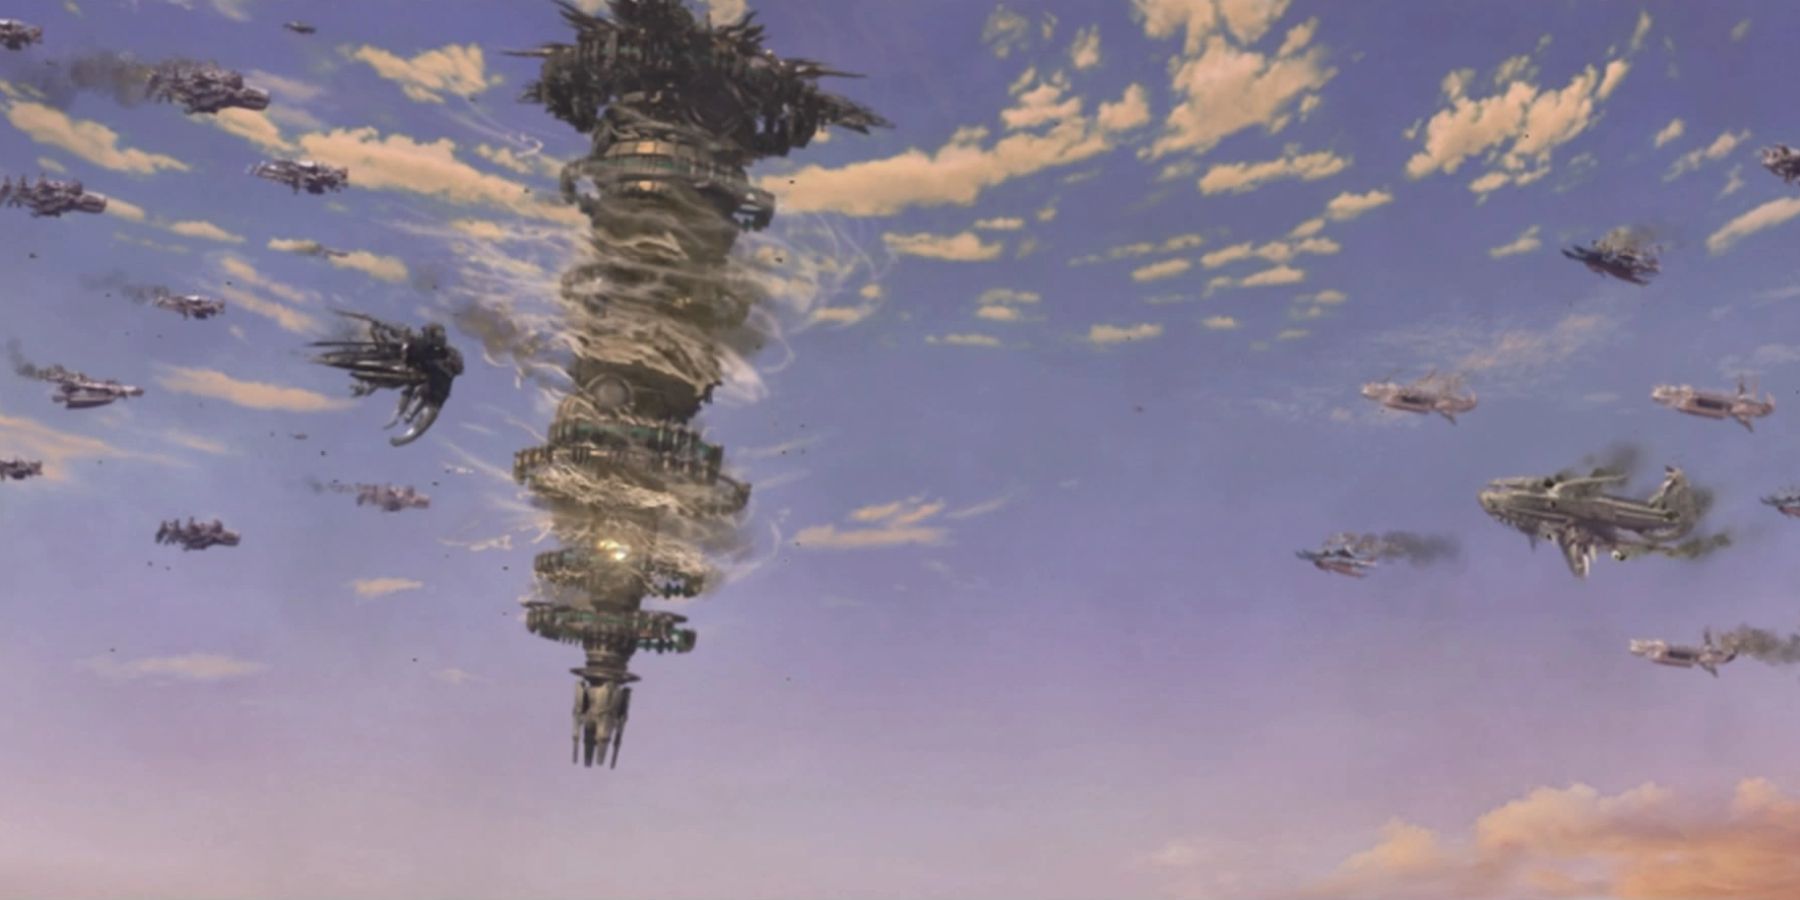 The Sky Fortress Bahamut in Final Fantasy 12